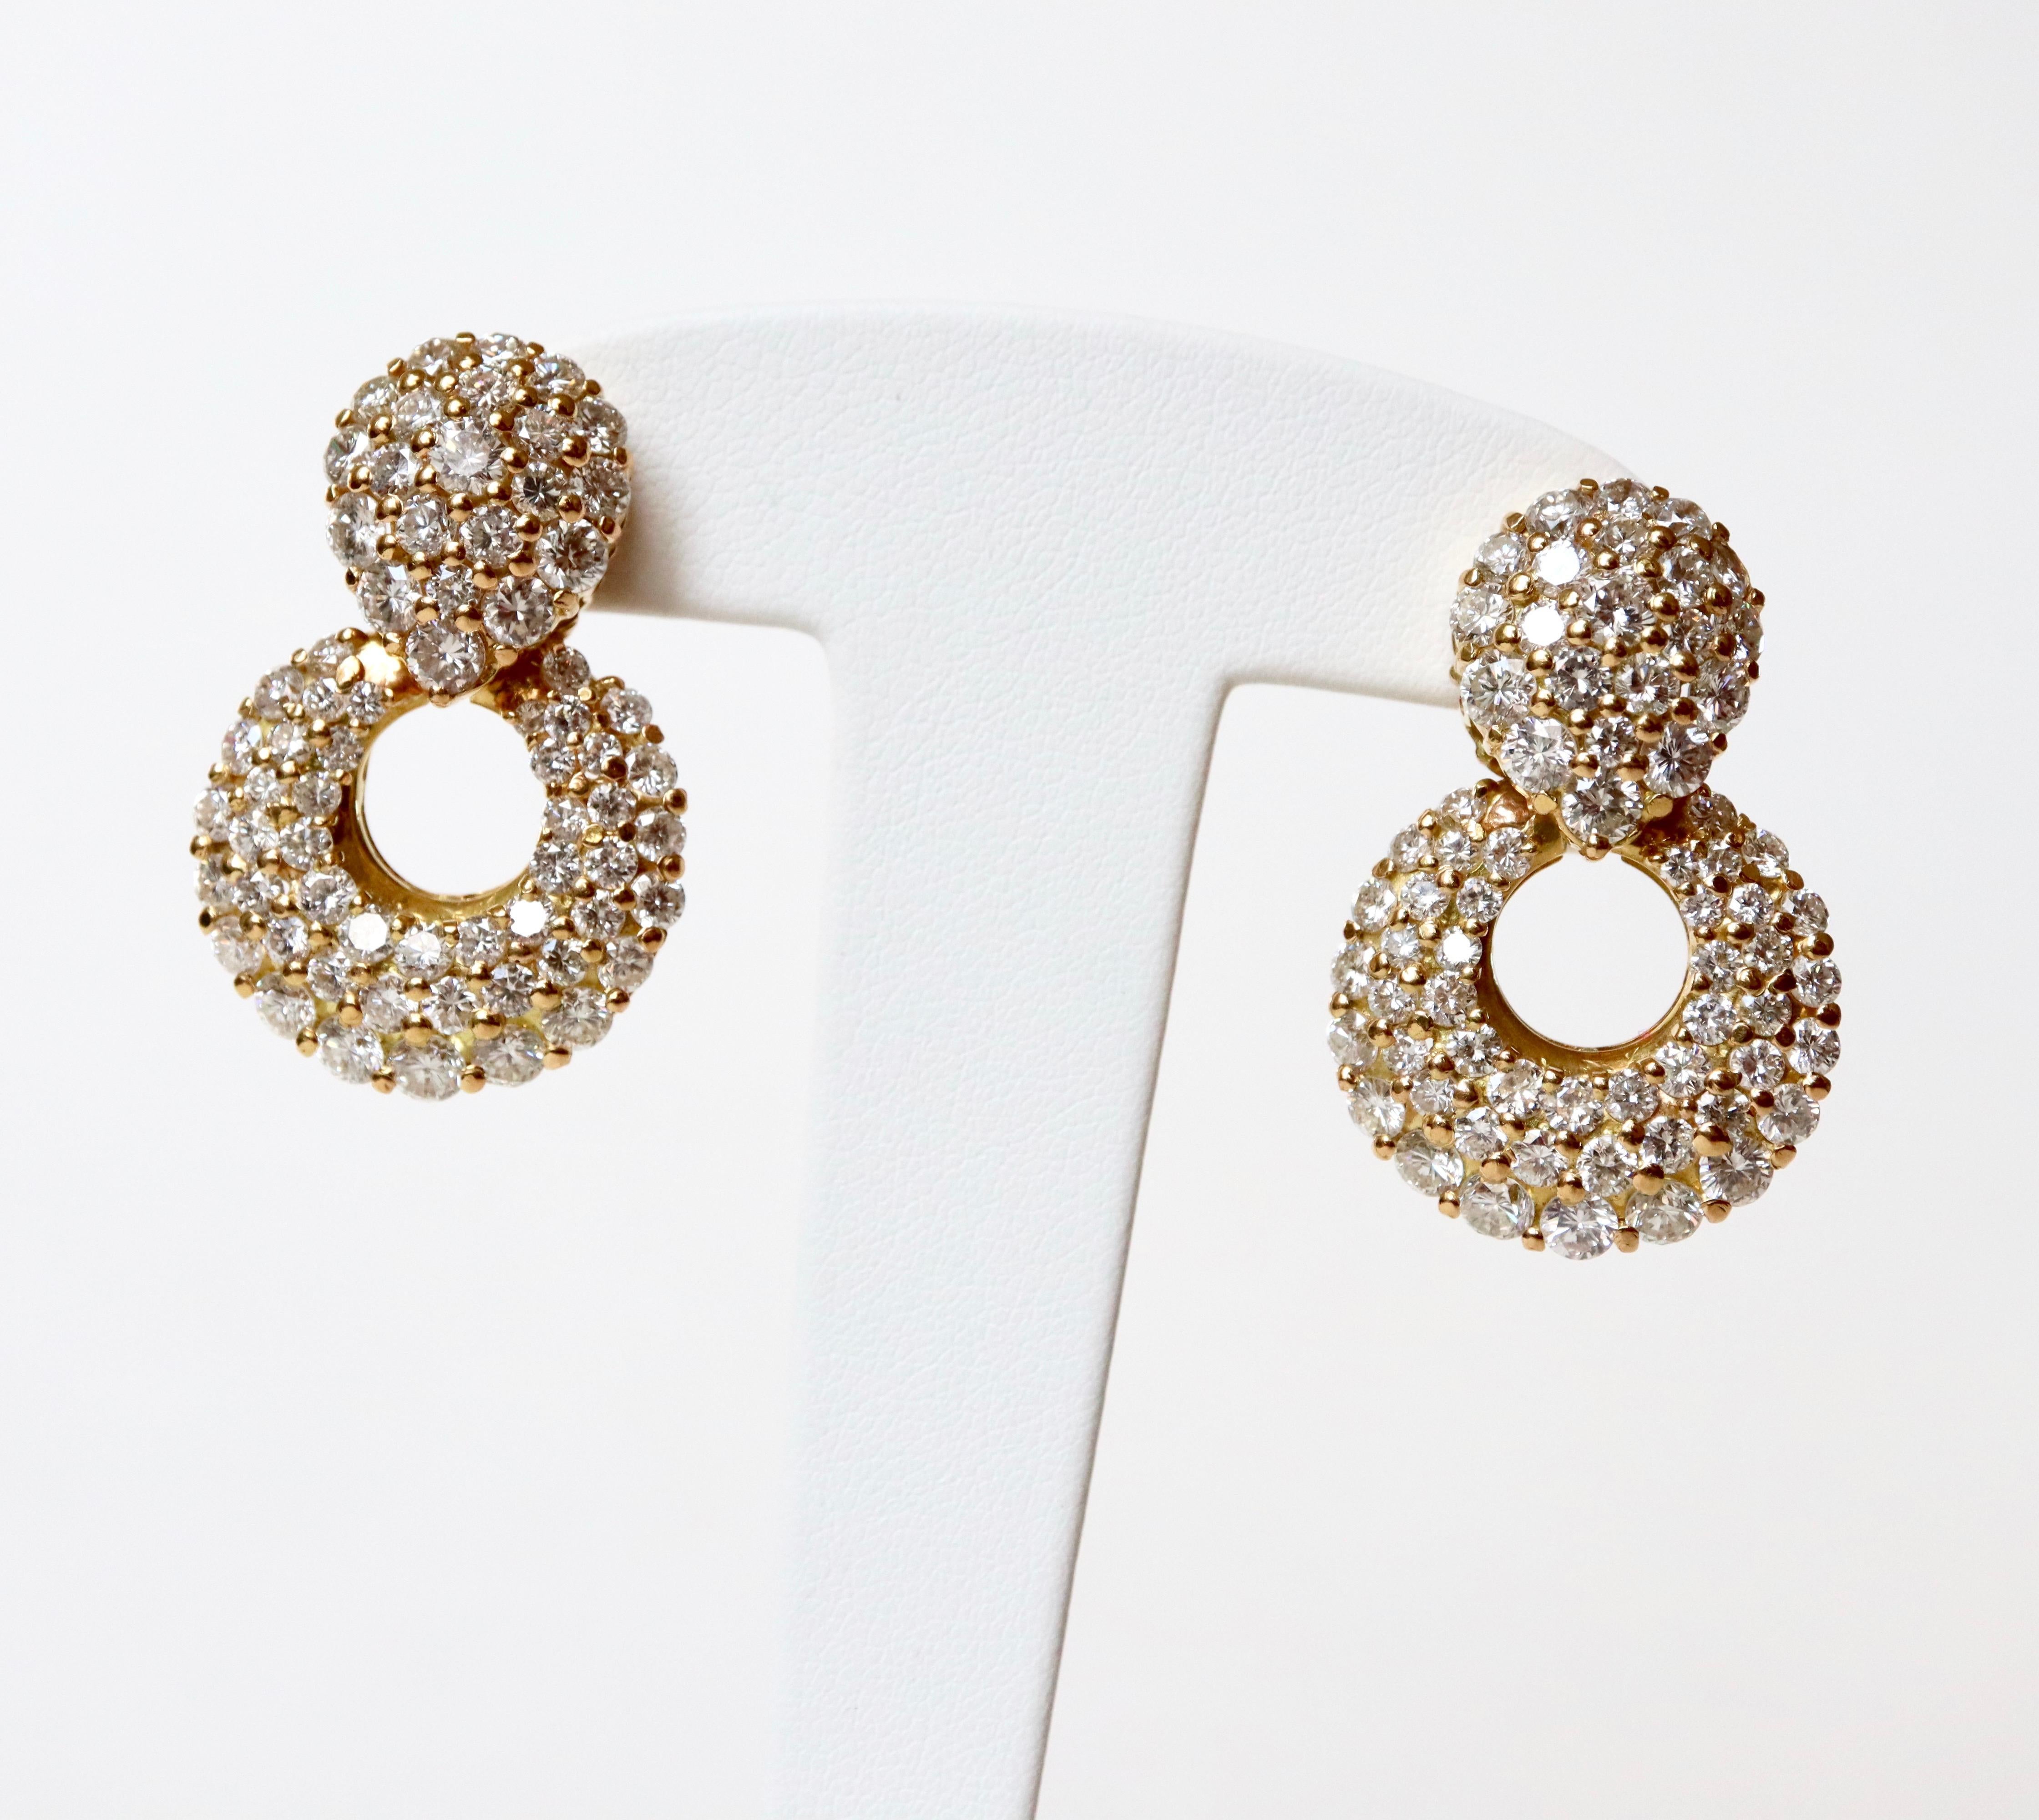 Clip Earrings in 18 Karat Yellow Gold and Diamonds Setting 6 Carat of Diamonds For Sale 1